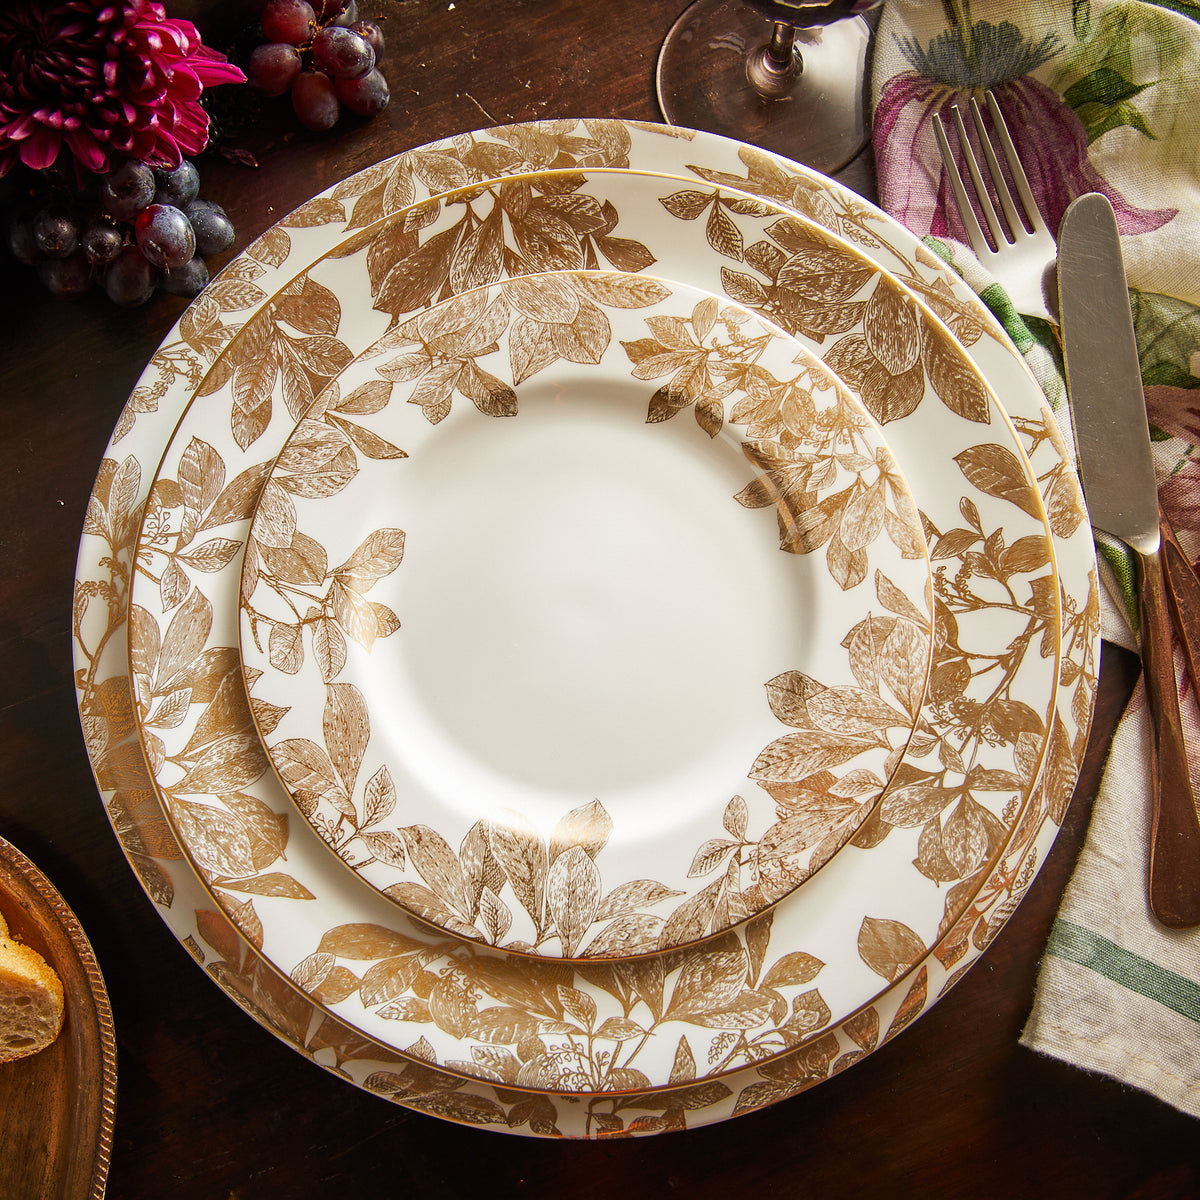 An Arbor Rimmed Salad Plate Gold with a floral pattern on it.